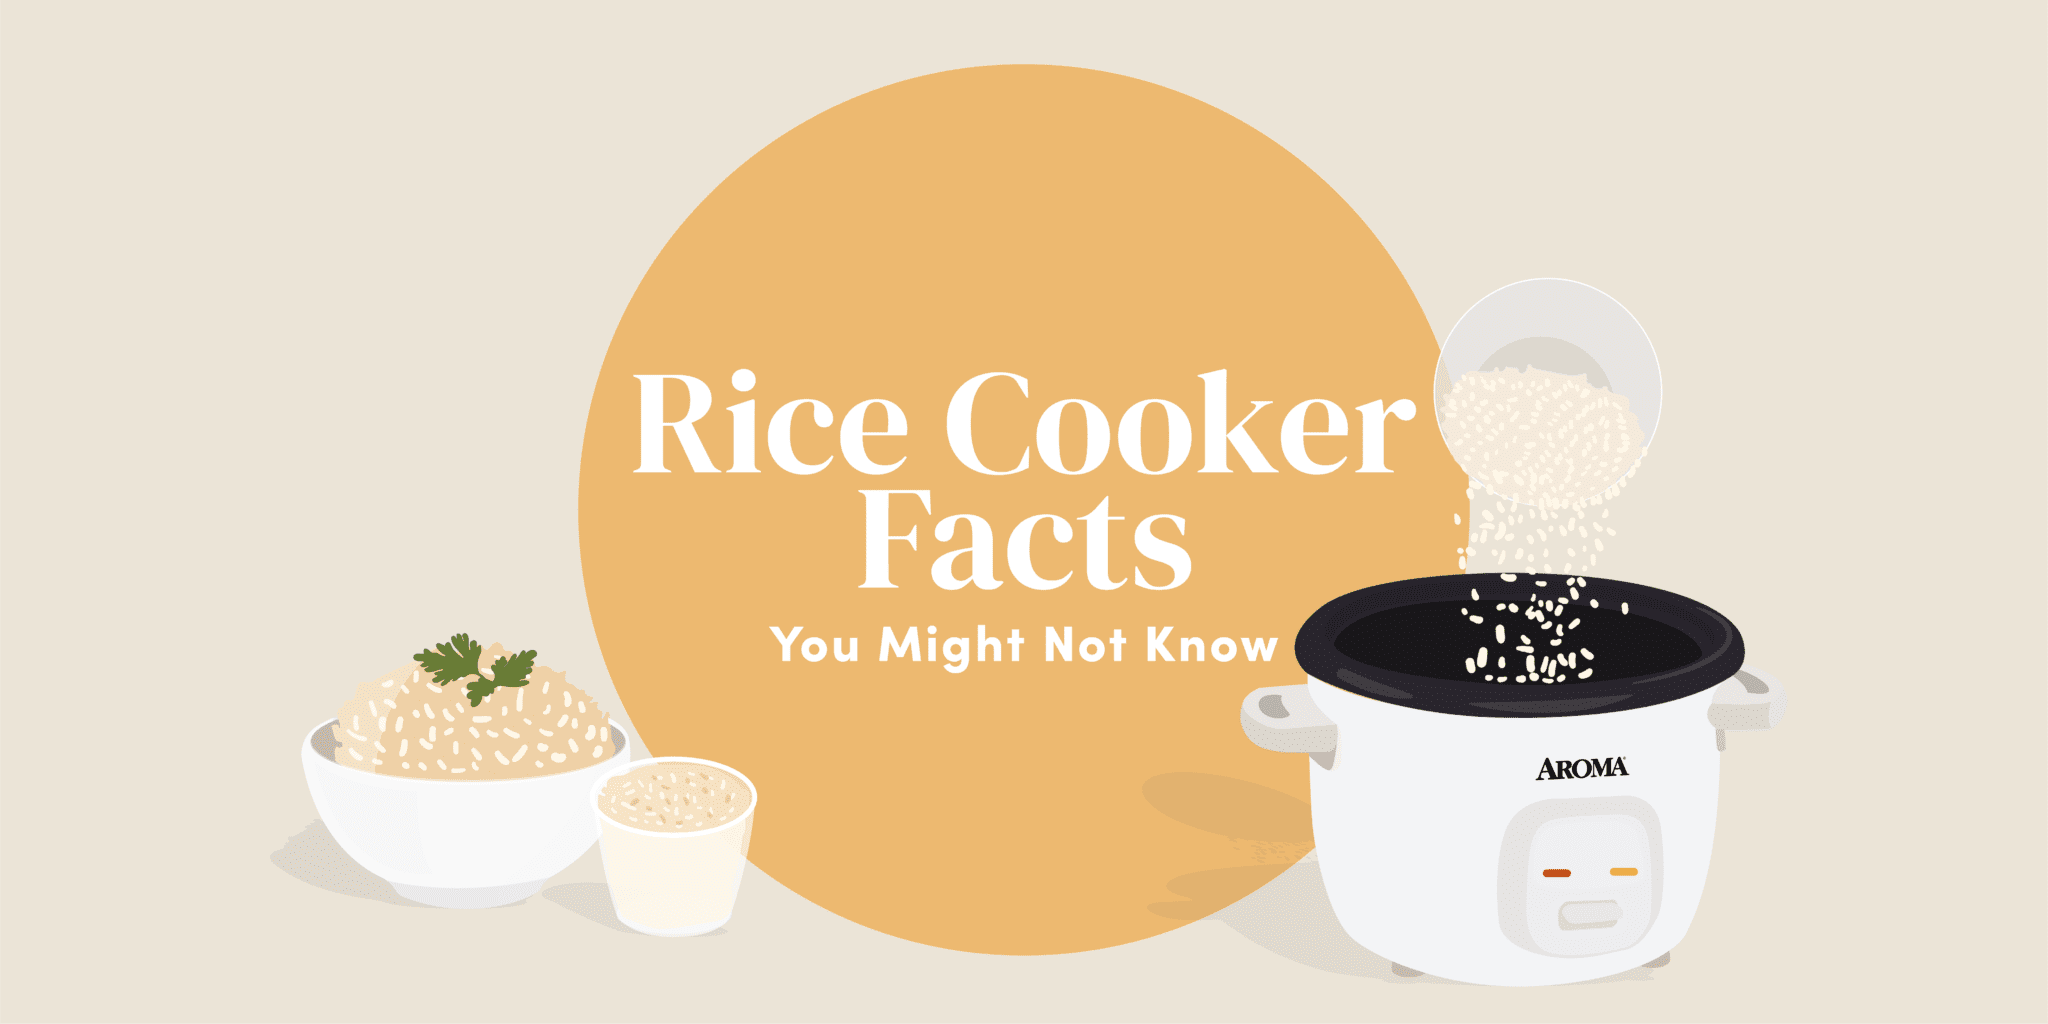 https://www.aromaco.com/wp-content/uploads/2022/10/Rice-Cooker-Facts-Blog1.png